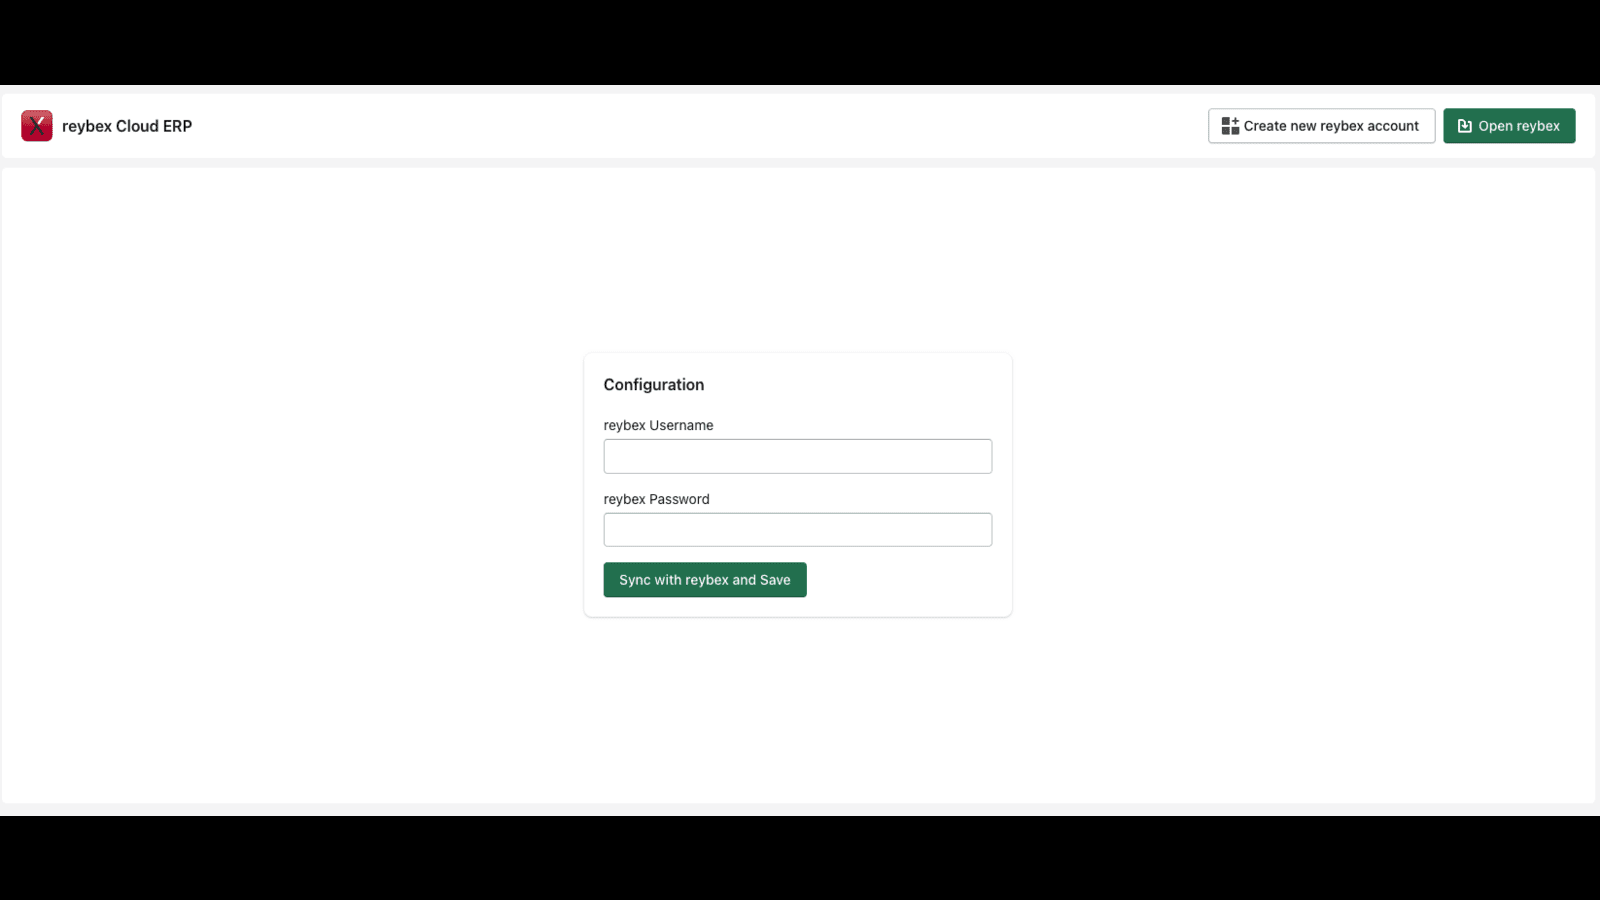 connect to reybex by creating a new account